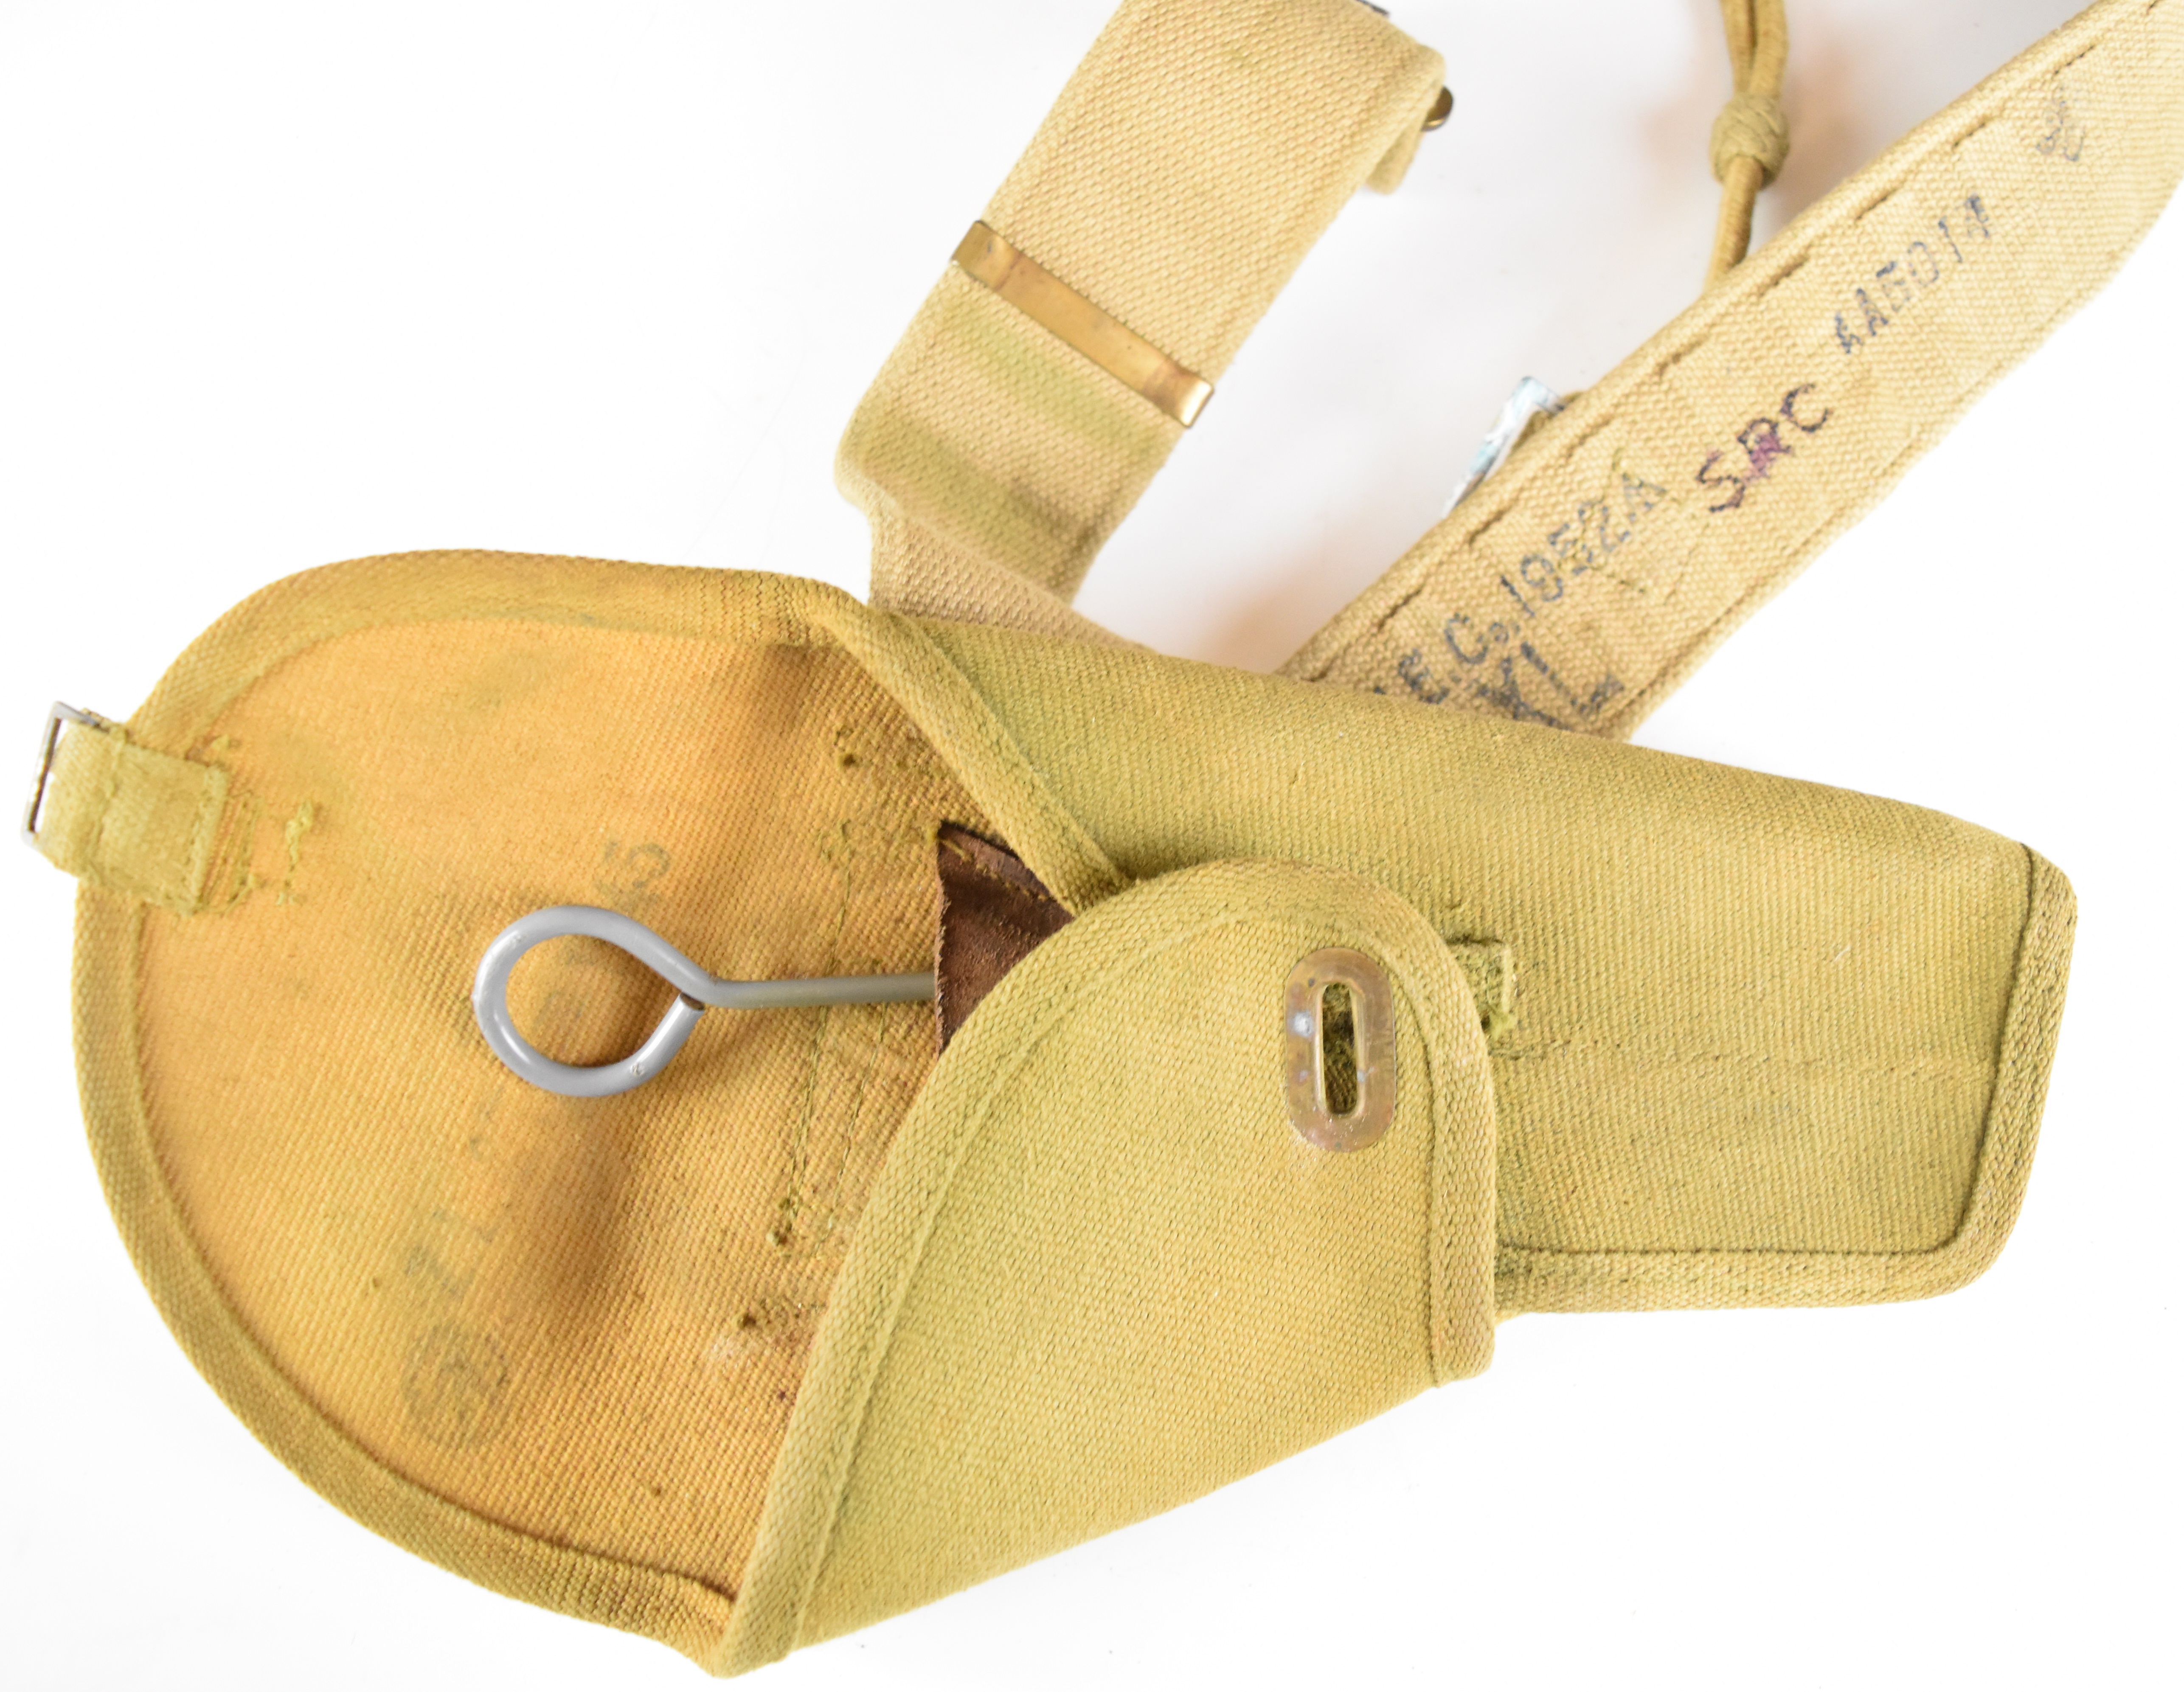 British WW2 webbing including ammunition pouches, belts, holsters, sling, lanyard and haversack, all - Image 8 of 11